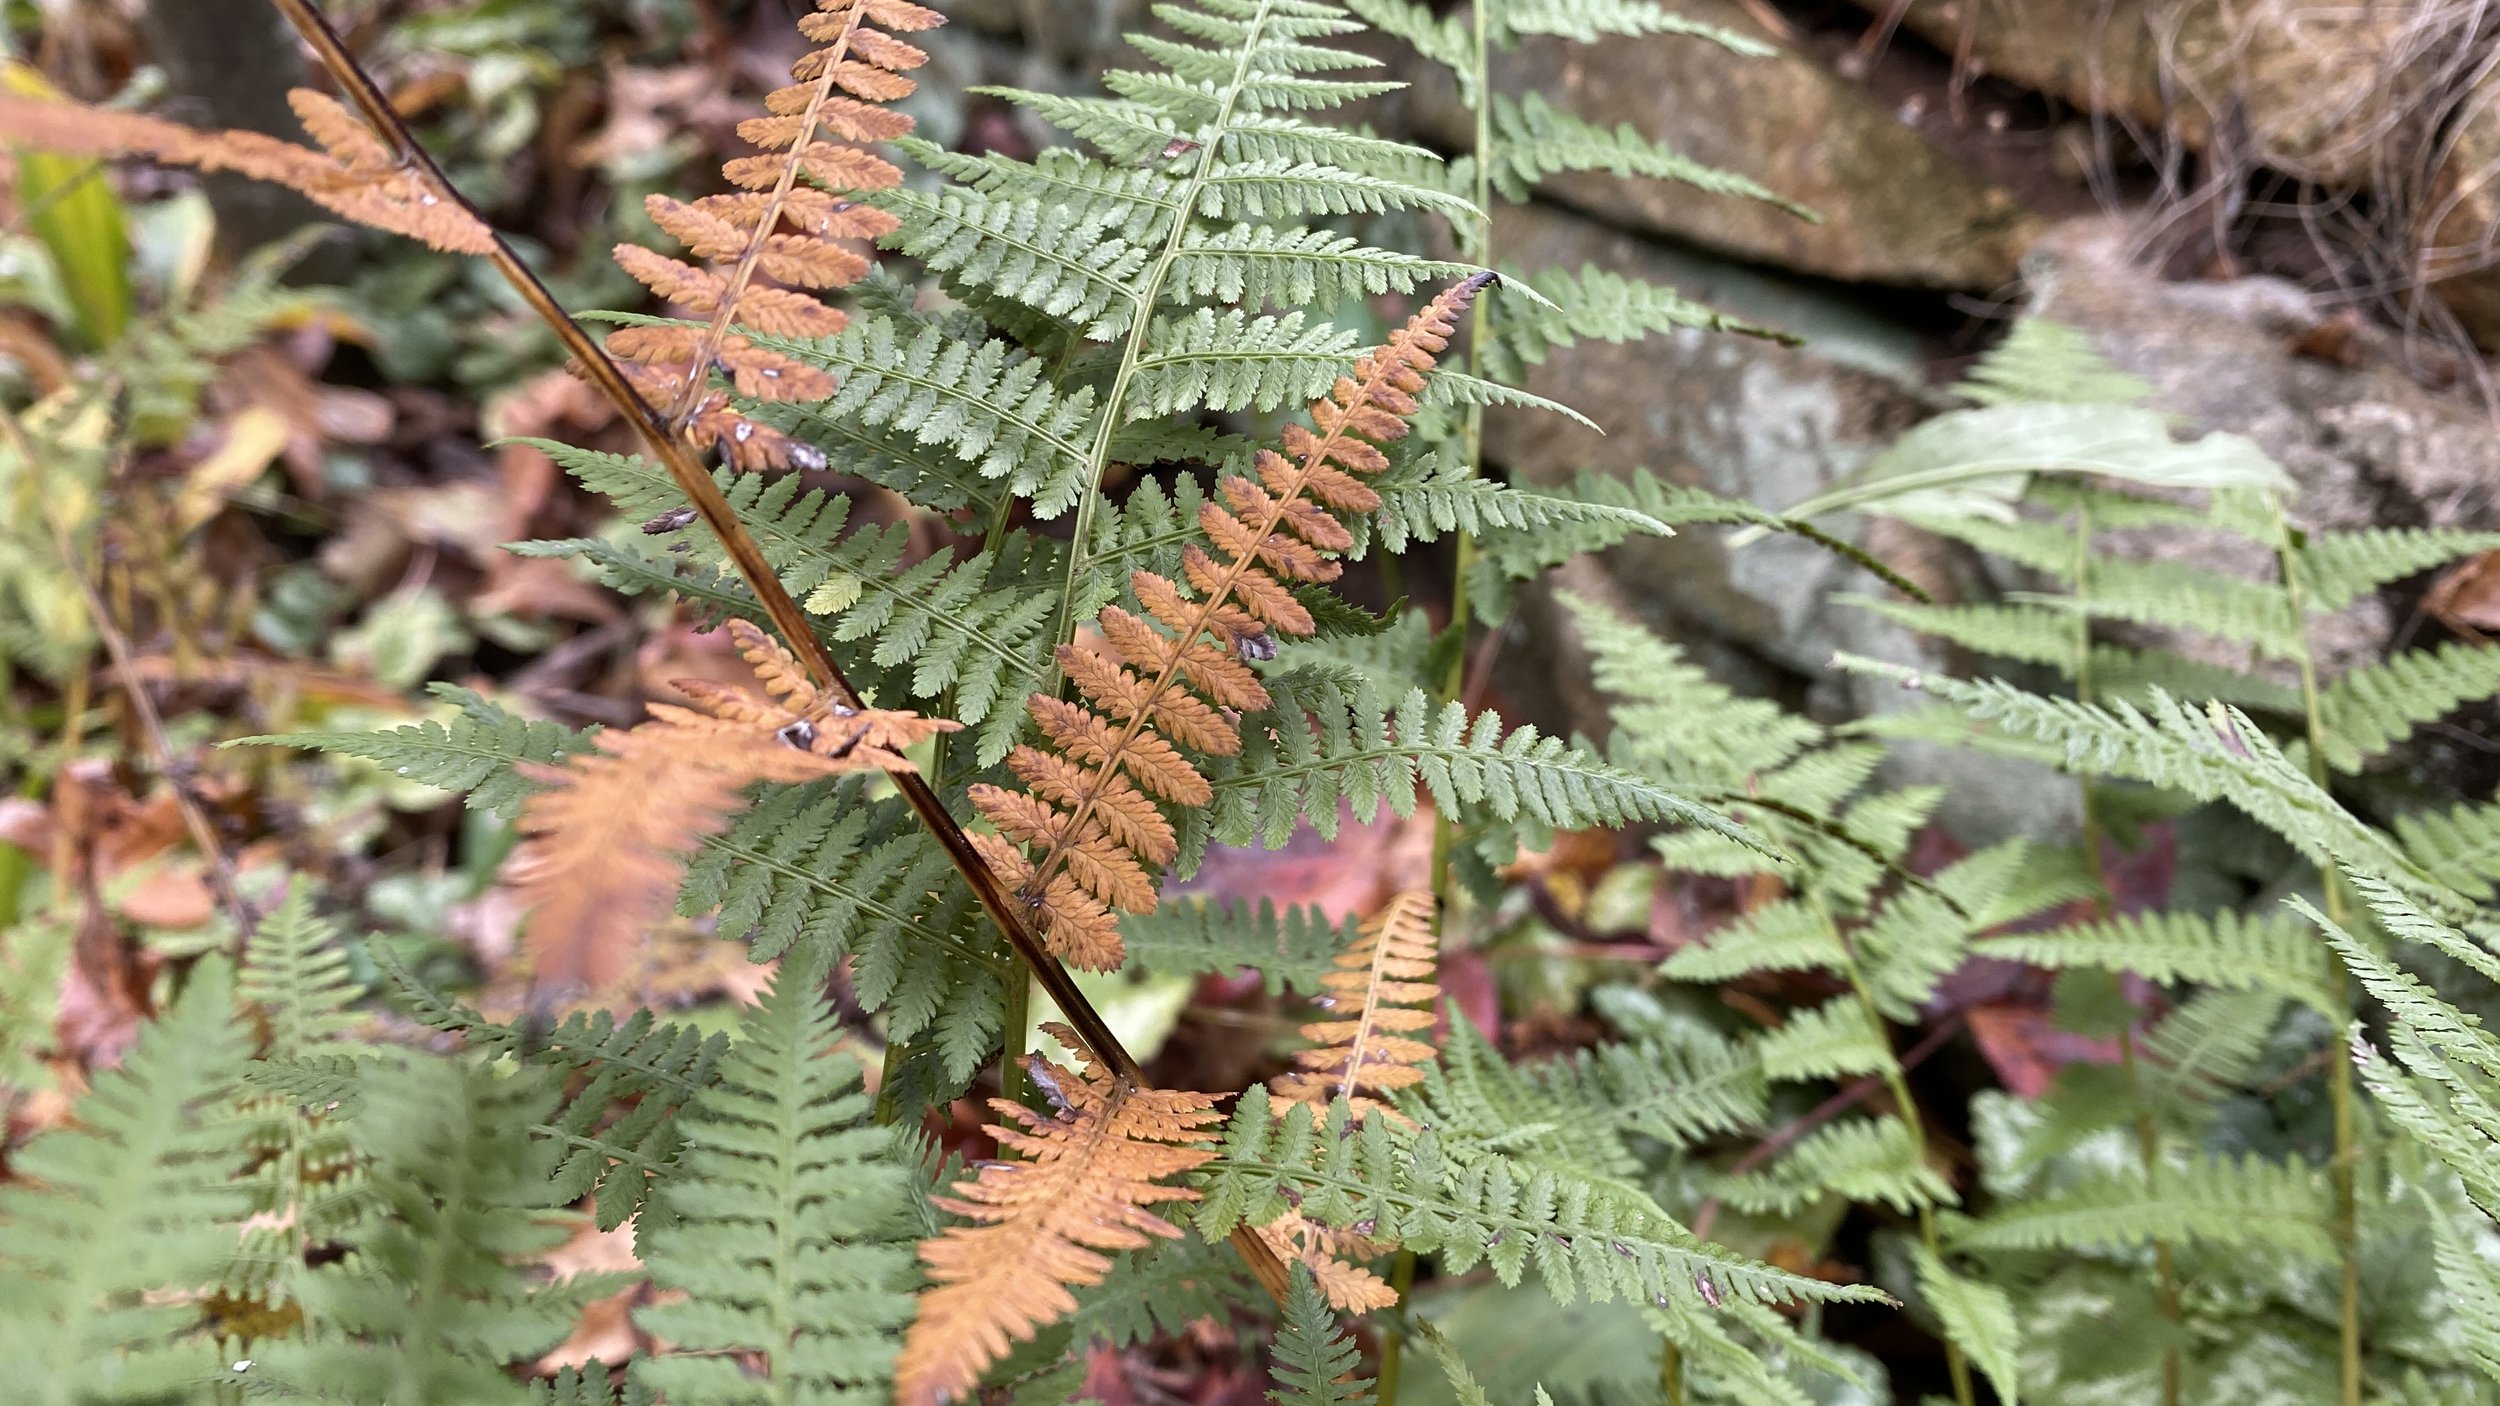  Ferns also get in on the fall color action.  It is interesting to me to see just one frond of Elizabeth’s  Athyrium filix-femina  (lady fern) with autumn hue against the rest of the fronds, which, by this point in the year, look rather bedraggled bu